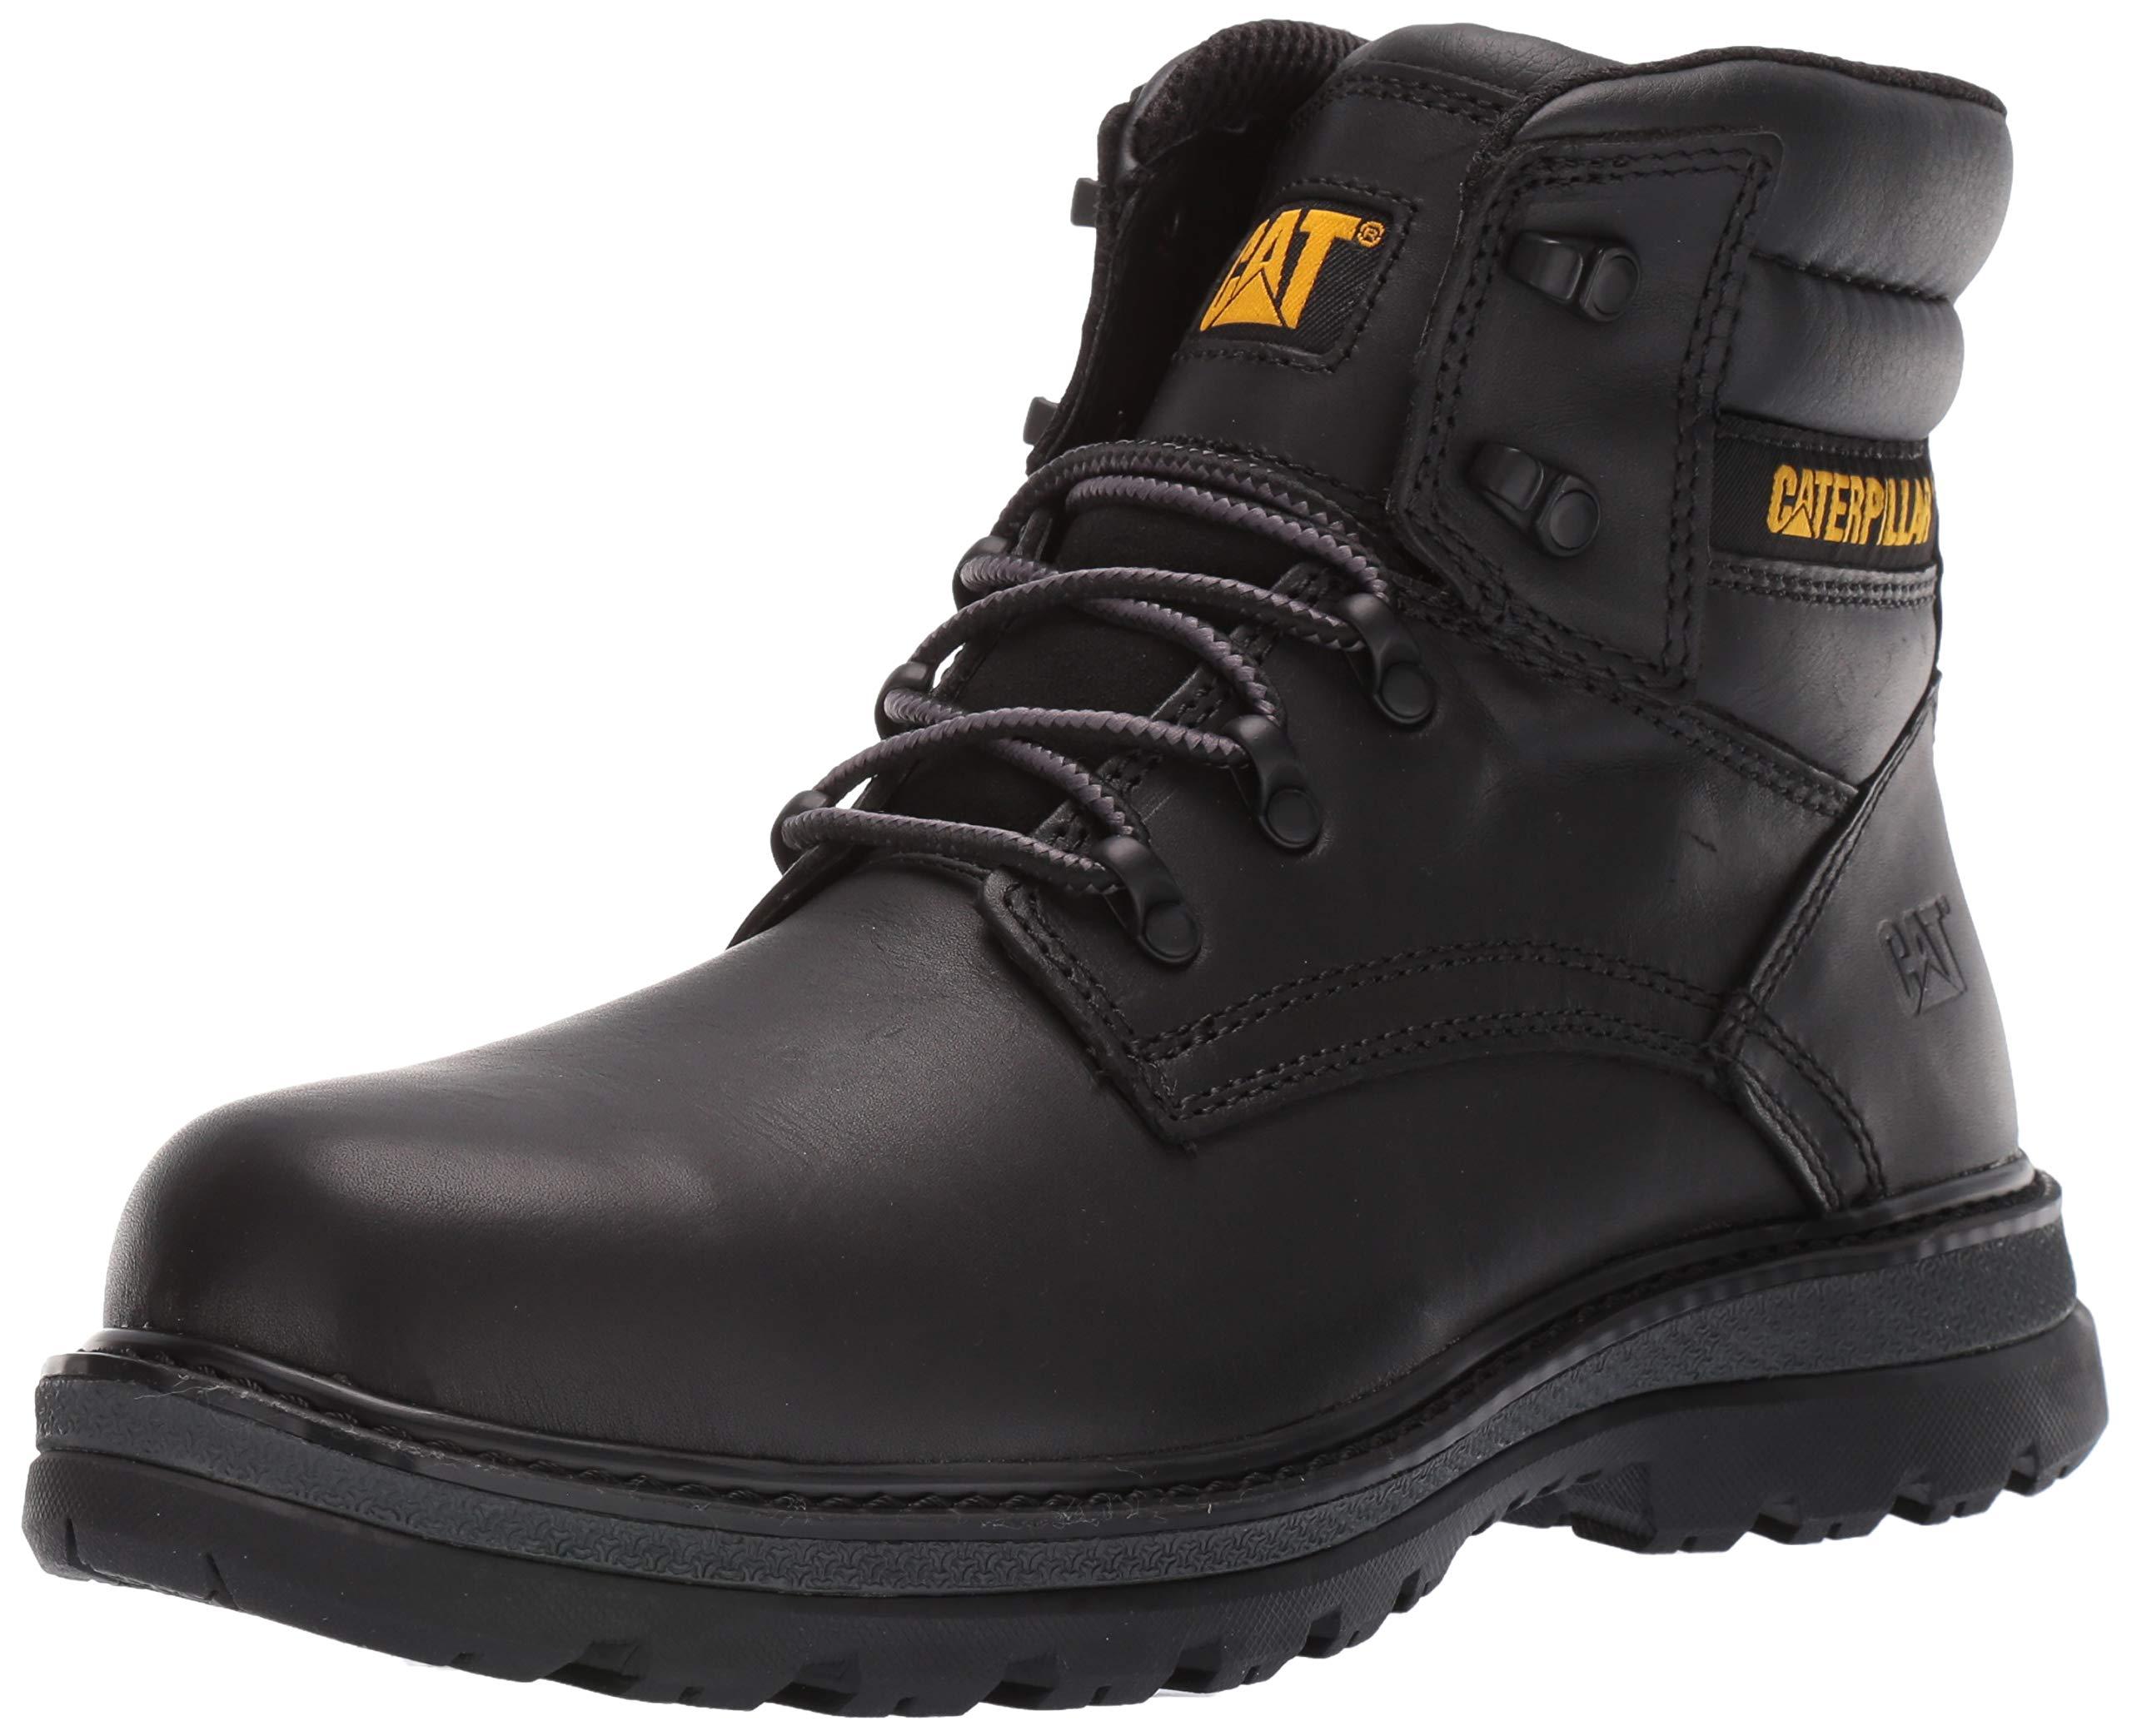 CAT Caterpillar Foxfield Safety Boots Mens S3 Industrial Steel Toe Work Shoes 